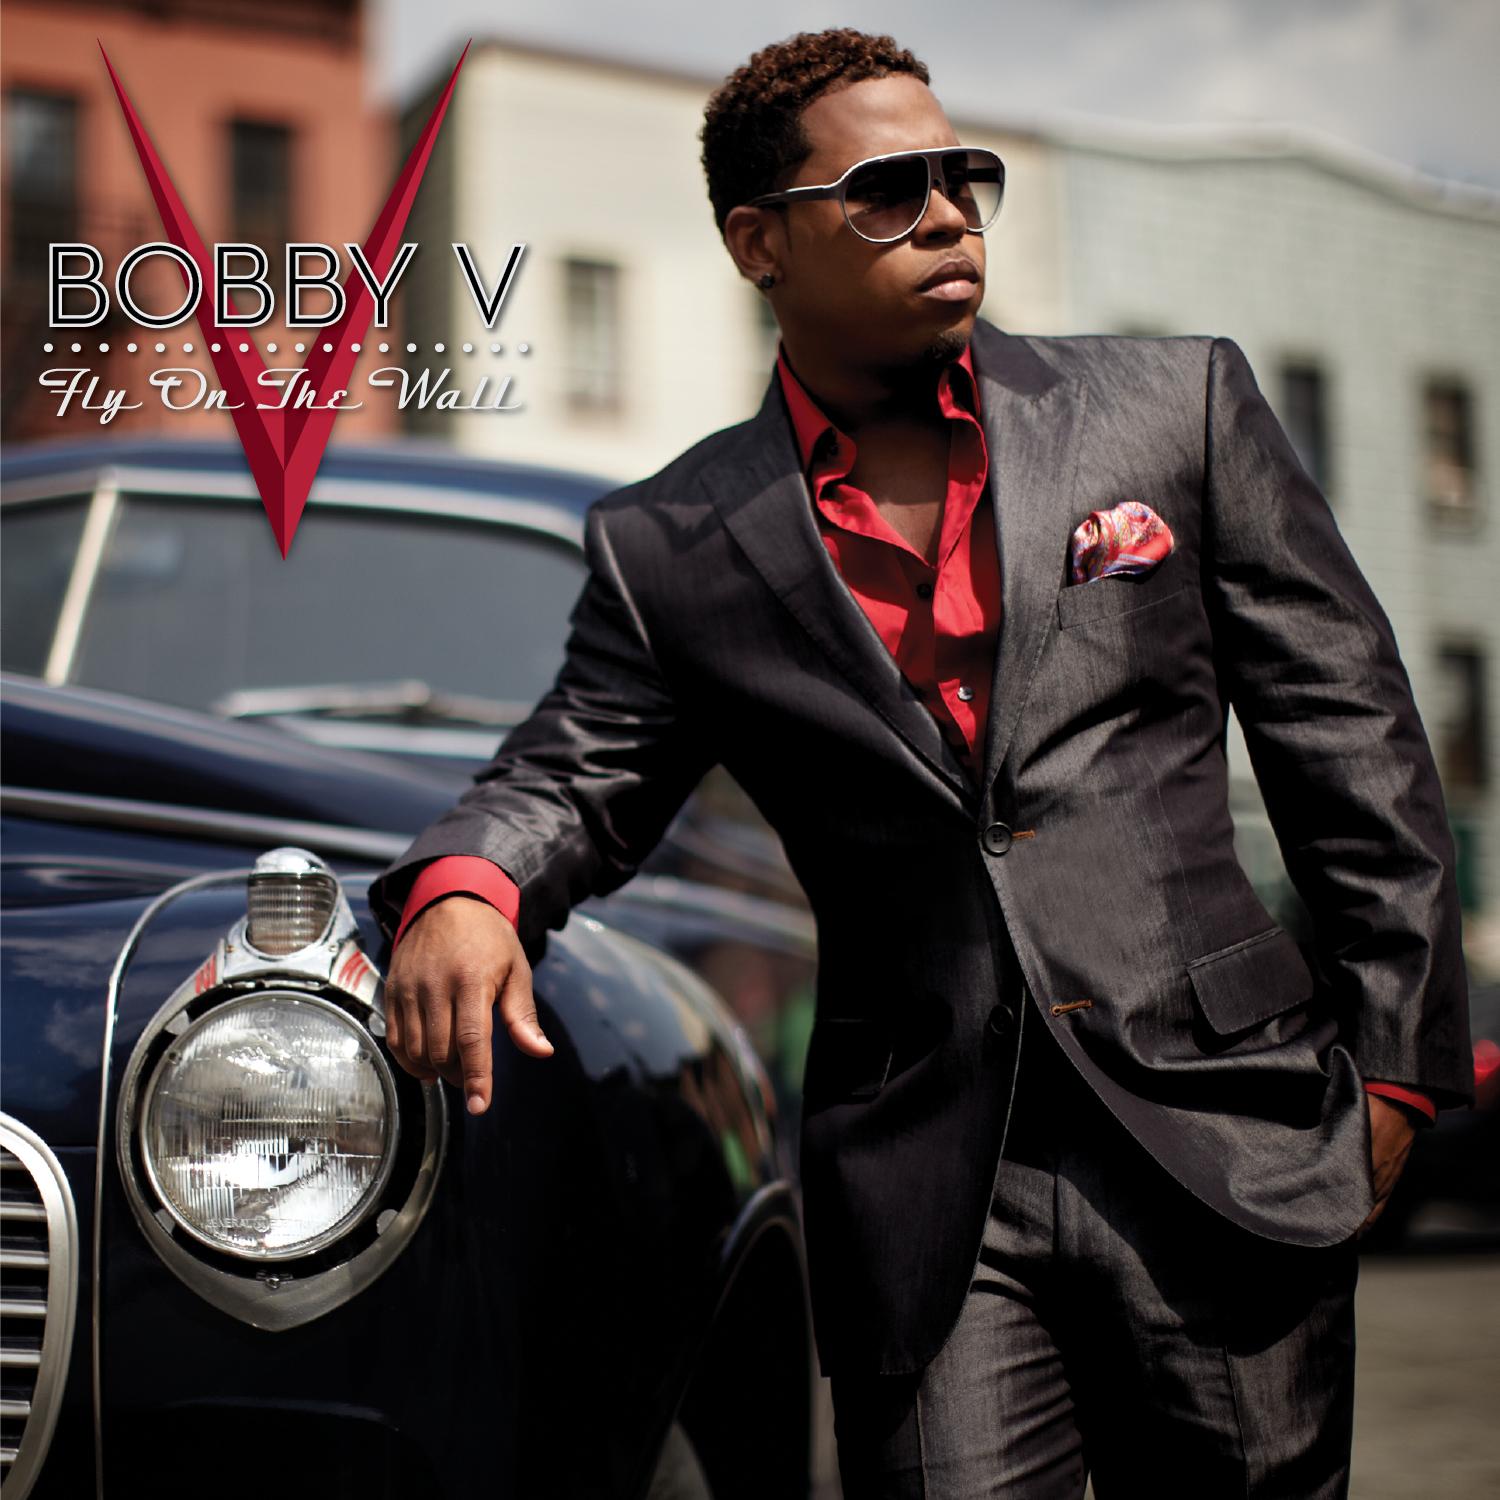 Bobby V Fly on the Wall Album Cover